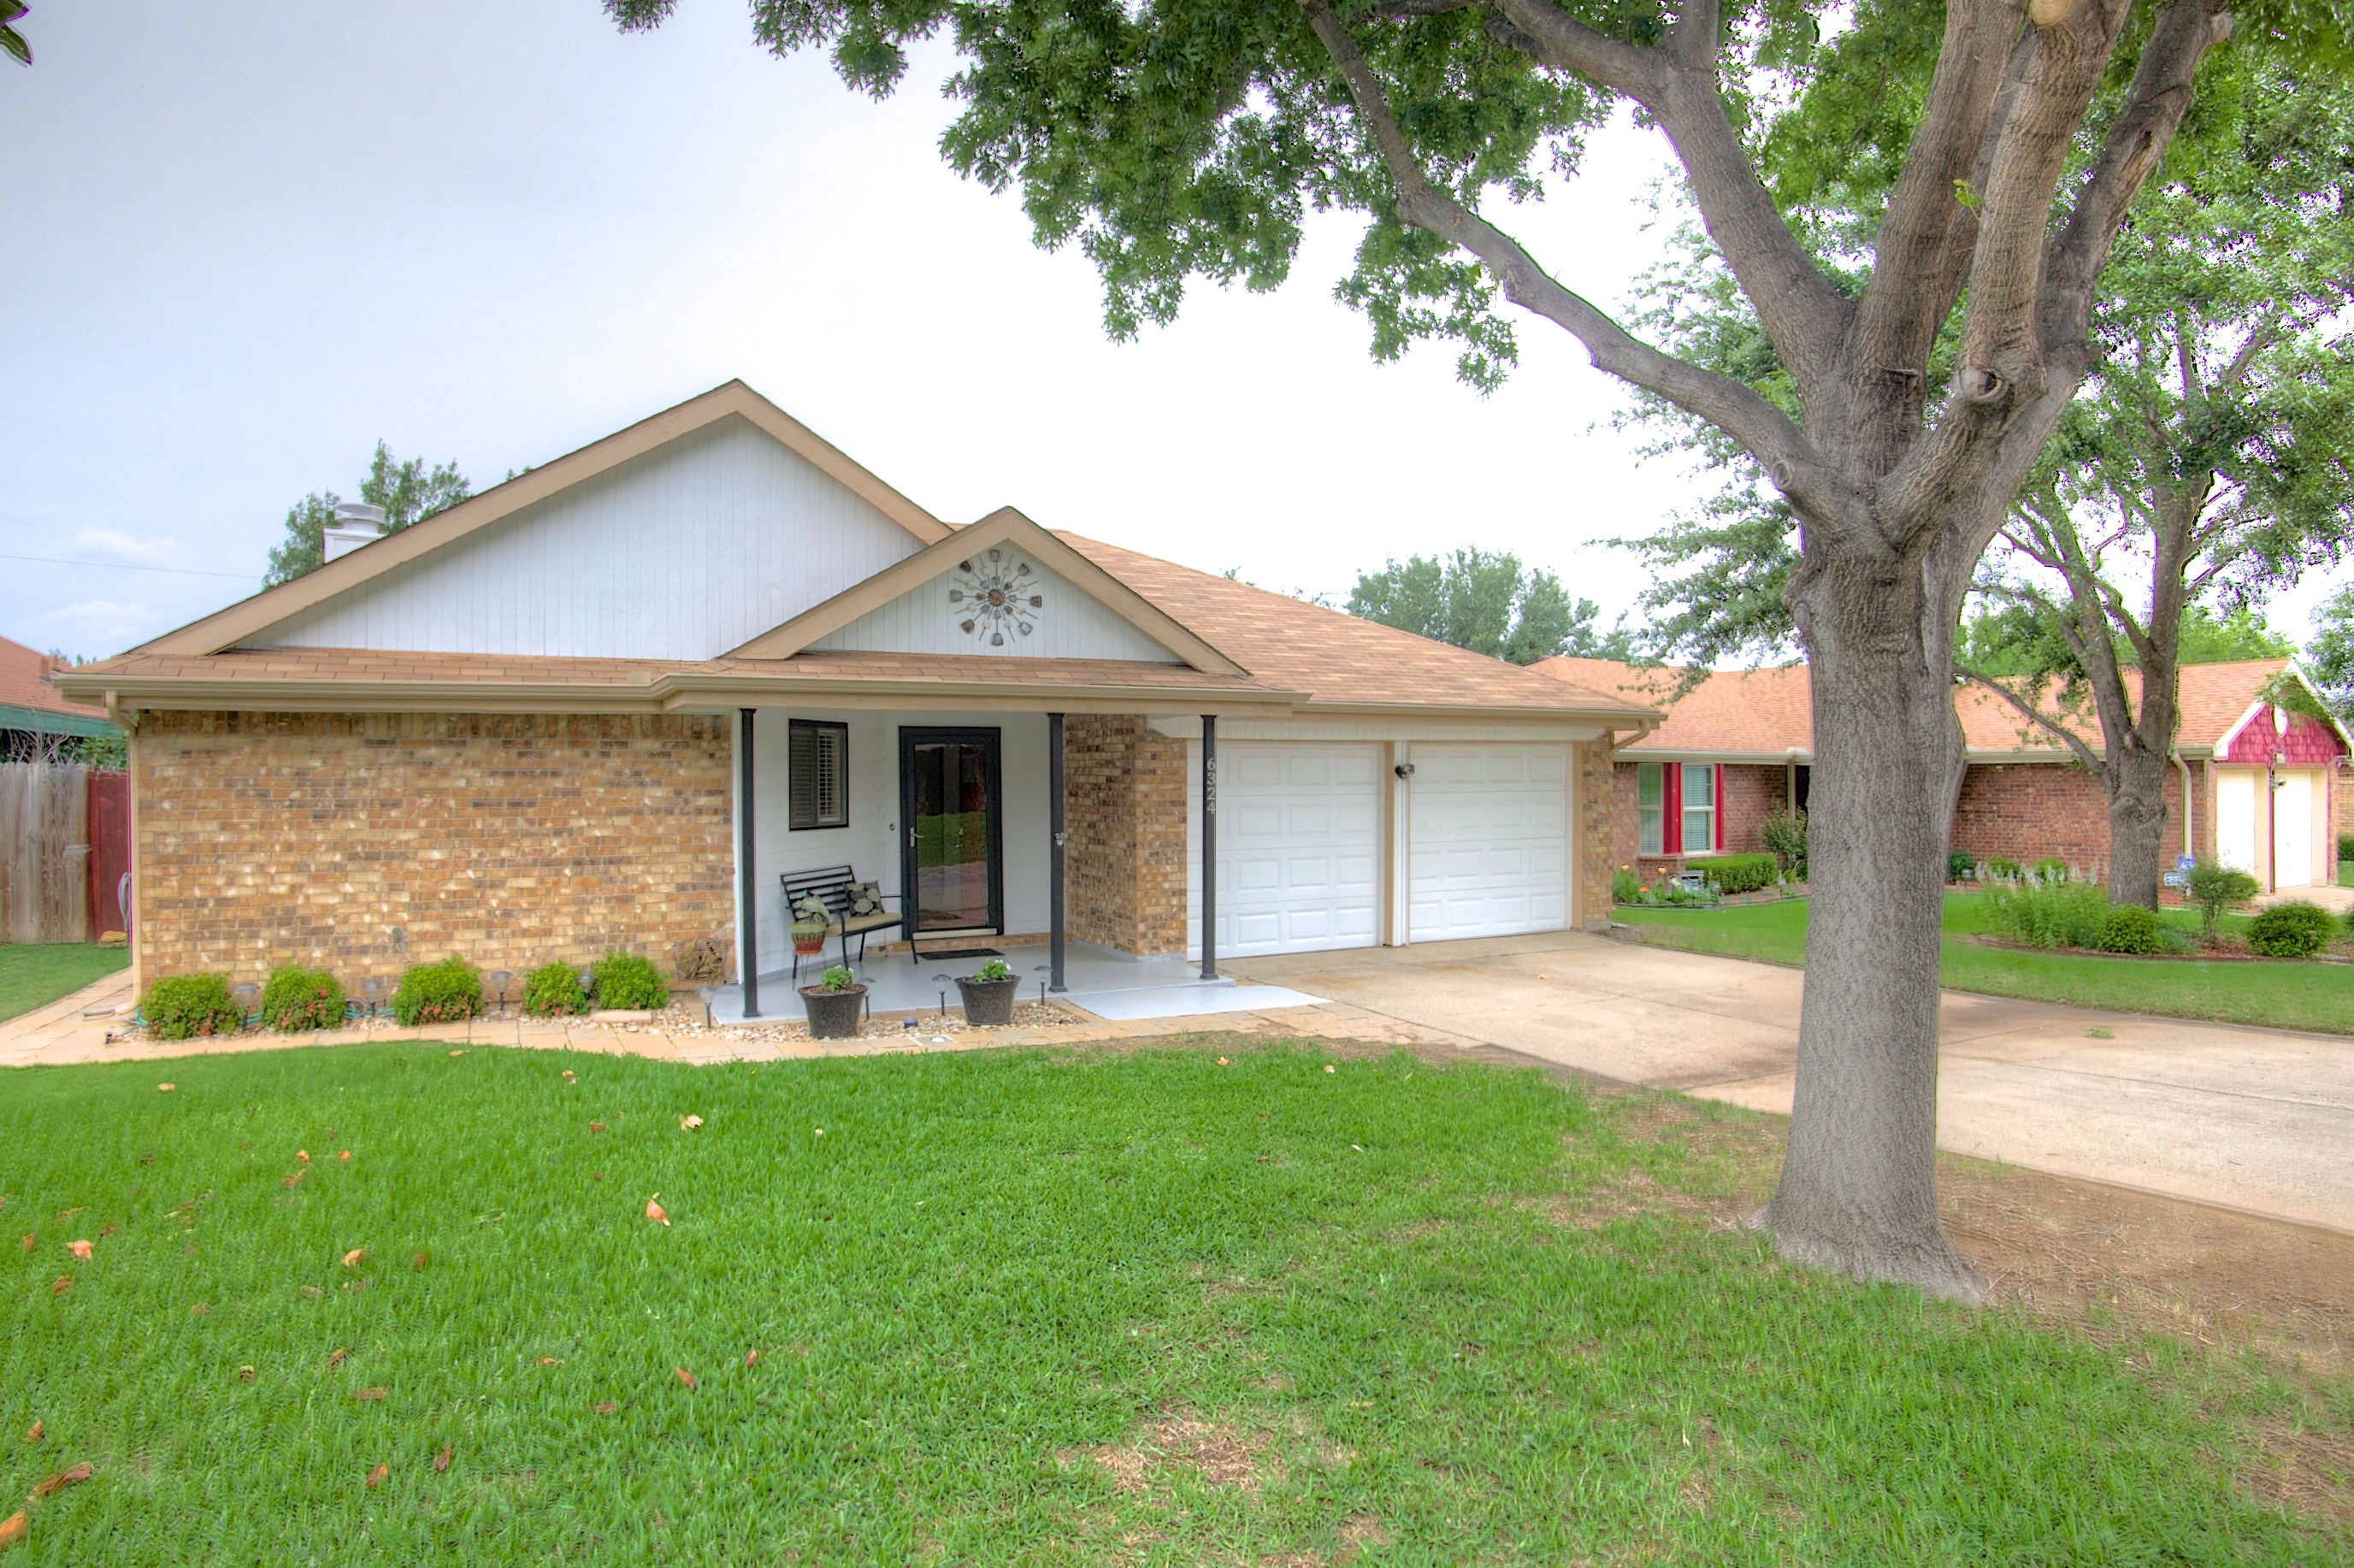 Featured image for “SOLD – Fort Worth Woodmont Home – 76133”